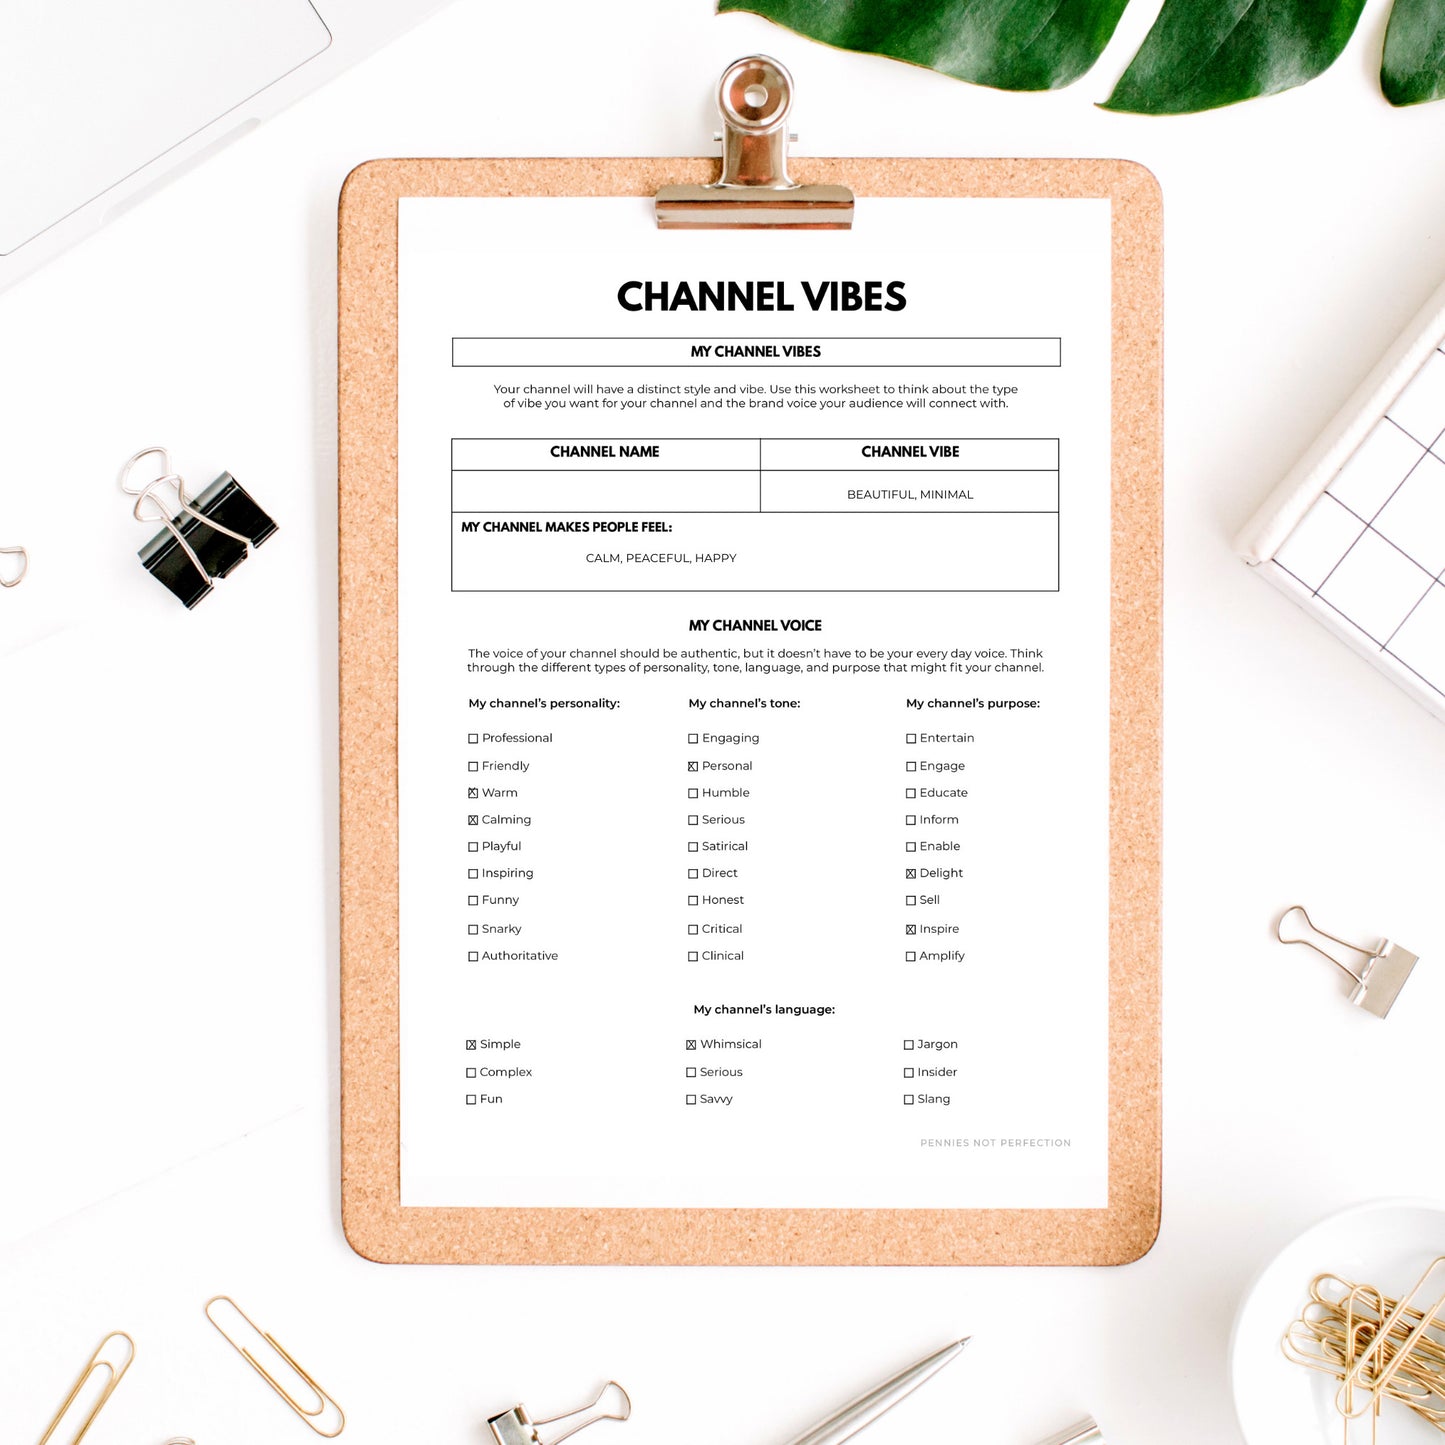 YouTube Channel Ideas Planner | New Channel Planner & Checklist Printable